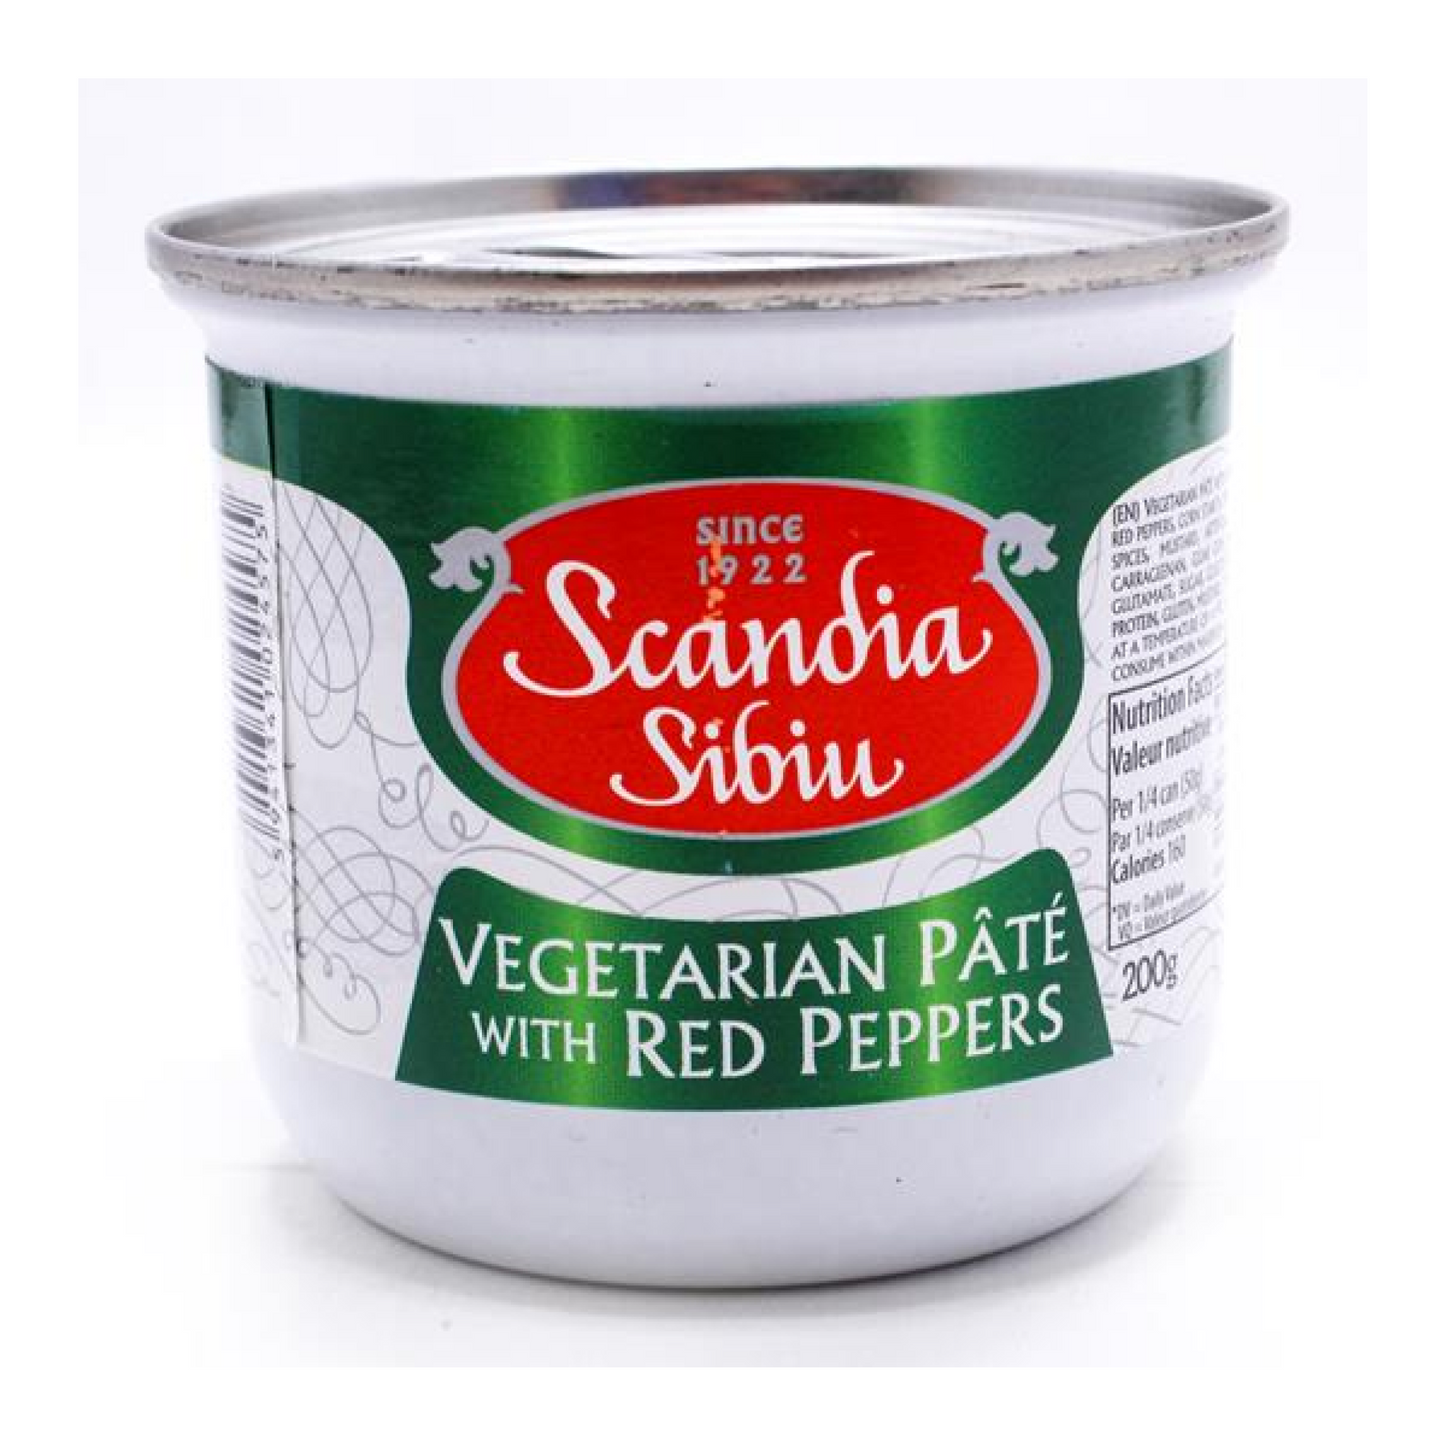 Scandia Sibu Vegetarian Paté with Red Peppers 200g